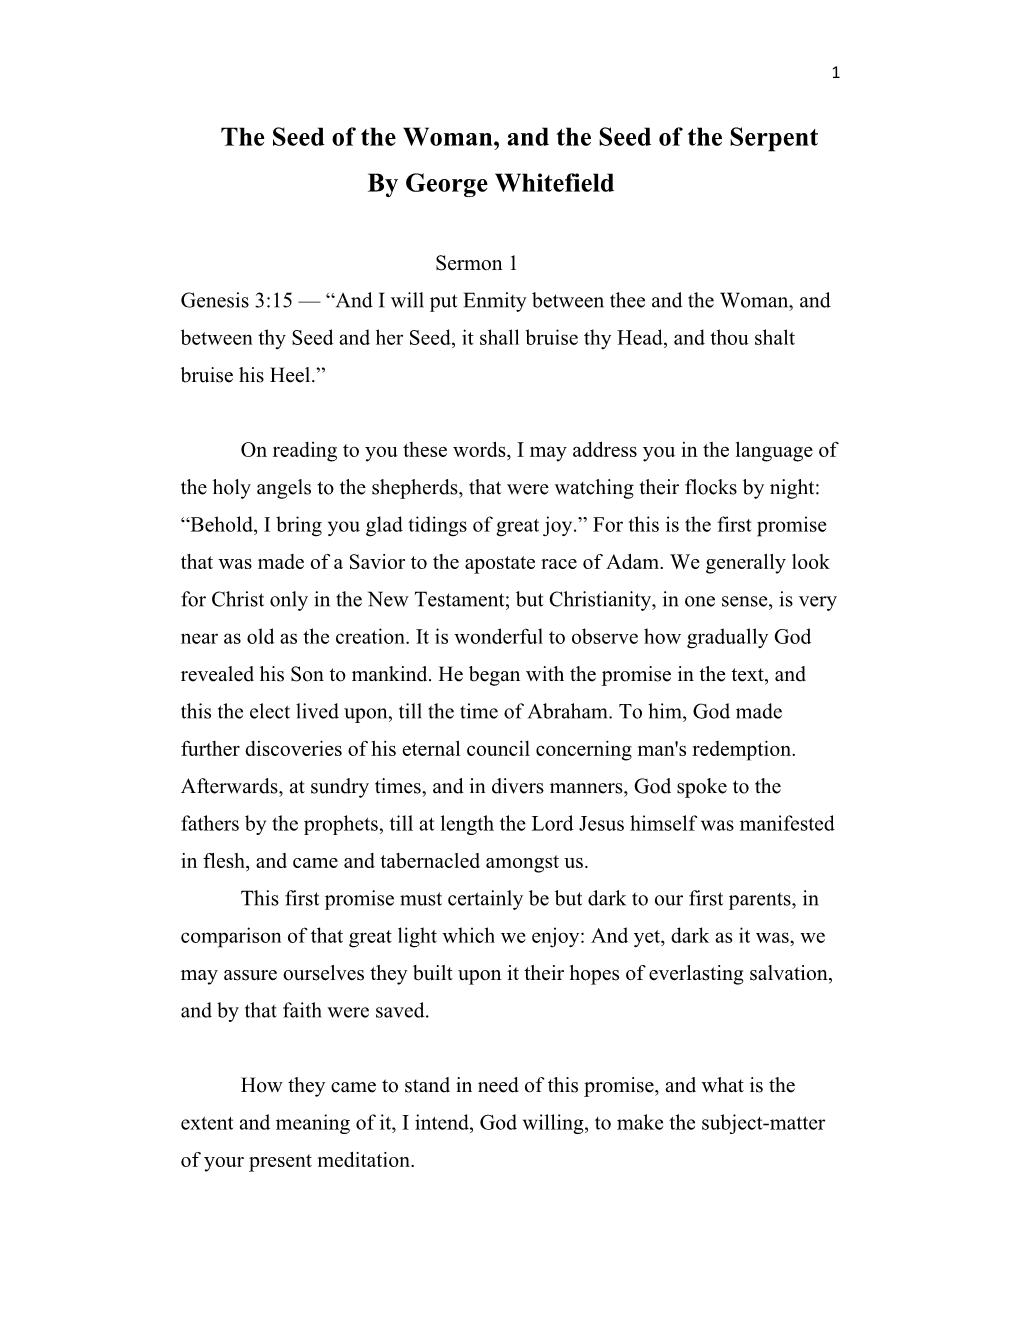 George Whitefield, the Seed of the Woman, Genesis 3:15, Sermon 1